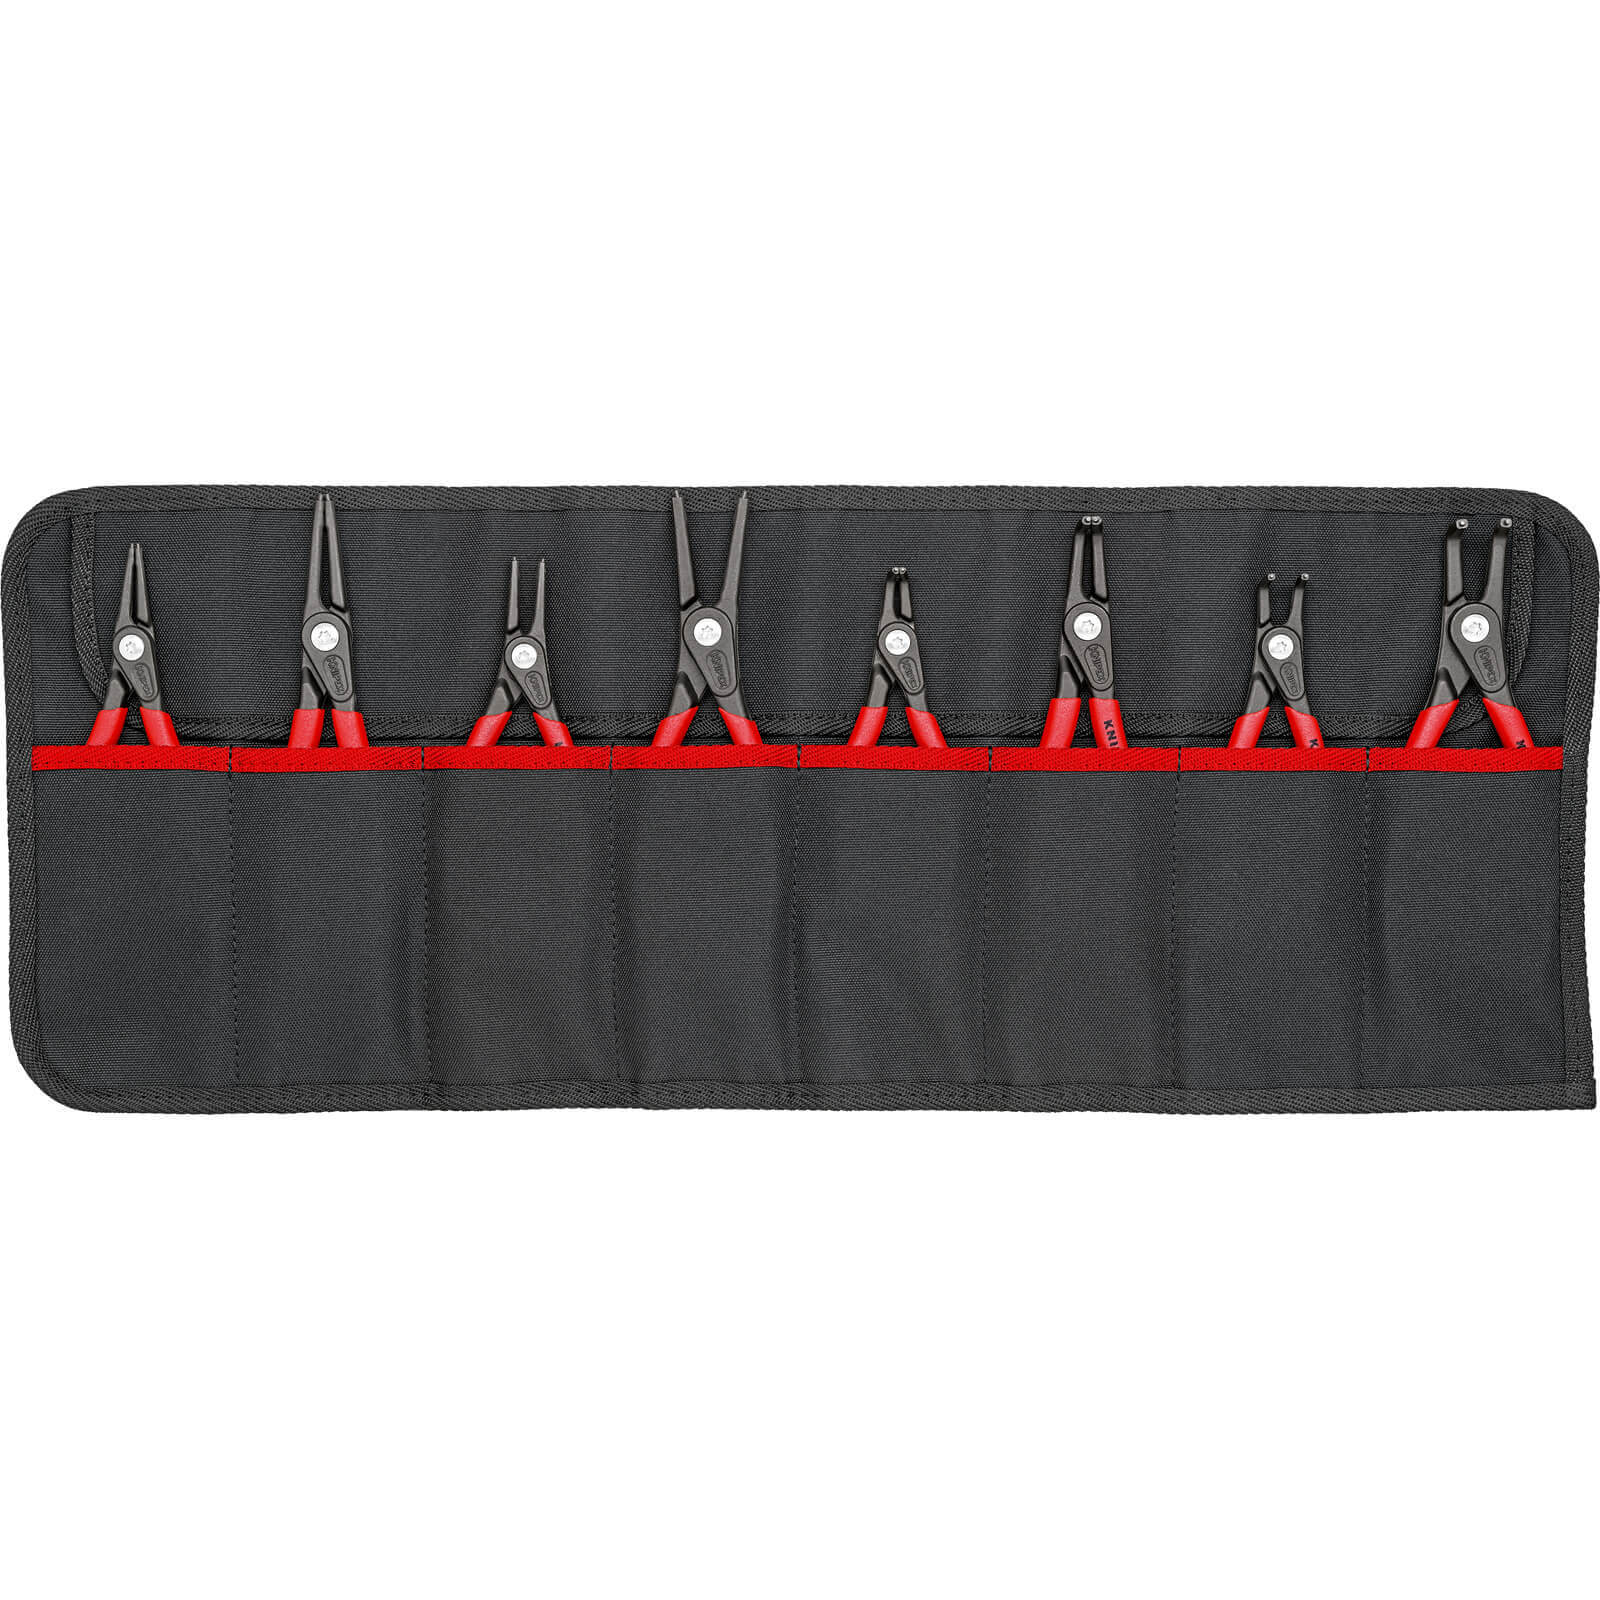 Photo of Knipex 8 Piece Precision Circlip Pliers Tool Roll Set